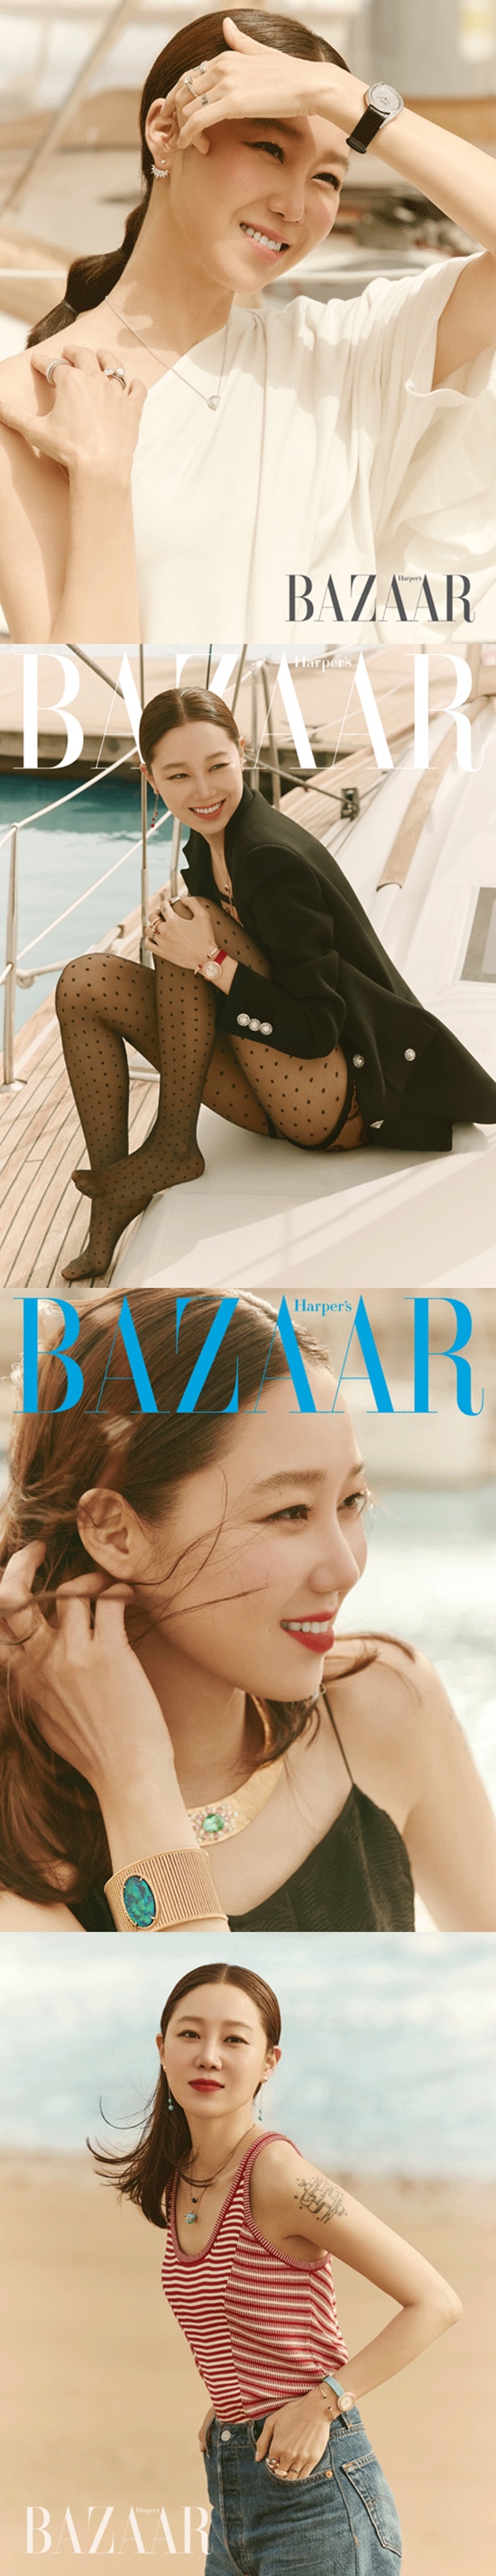 Actor Gong Hyo-jin showed off both adorability and eleganceA cover picture of Gong Hyo-jin with fashion magazine Harpers Bazaar was released on Thursday.In the public picture, Gong Hyo-jin is full of liveliness and elegant appearance perfectly blended with the brilliant sunshine of early summer.Gong Hyo-jin, who showed his own personality and fashionable style, released a candid story about Gong Hyo-jinness that he had shown during his long career as an actor in an interview after shooting.Asked about Actors new screening, interest in the environment, and influence as a fashionista, he said, Good is the correct person, but it is easily broken.It doesnt look like a great deal, but it changes well, but when you like it, you like it very much and you have a long interest.I like what I like for a long time, so I really like it, but I think it feels like it. Asked about the role that he wants to play the most friend of the characters he has played so far, he said, The camellia is a baby, there is Yongsik, and I think it will be too busy to see the store.Seo Yoo-kyung of Pasta seems to be the best friend, he said, and then he gave an interesting answer that he wanted to Friend with himself.I really think a lot about Friends, I miss them so often and express my affection.I like to have a lot of time and I like to be in a person, I drive well, I pick up well and I am good at gifts. Also, Gong Hyo-jin said, I received a huge puzzle and wanted to get Who does this?Something Actor likes to do, so he learns weaving with a class app: sends all the ingredients home and joins the teacher through video.If you are lonely, this way would be good. He also handed honey tips to those who spend their time alone due to the pandermics.Photo: Harpers Bazaar Korea